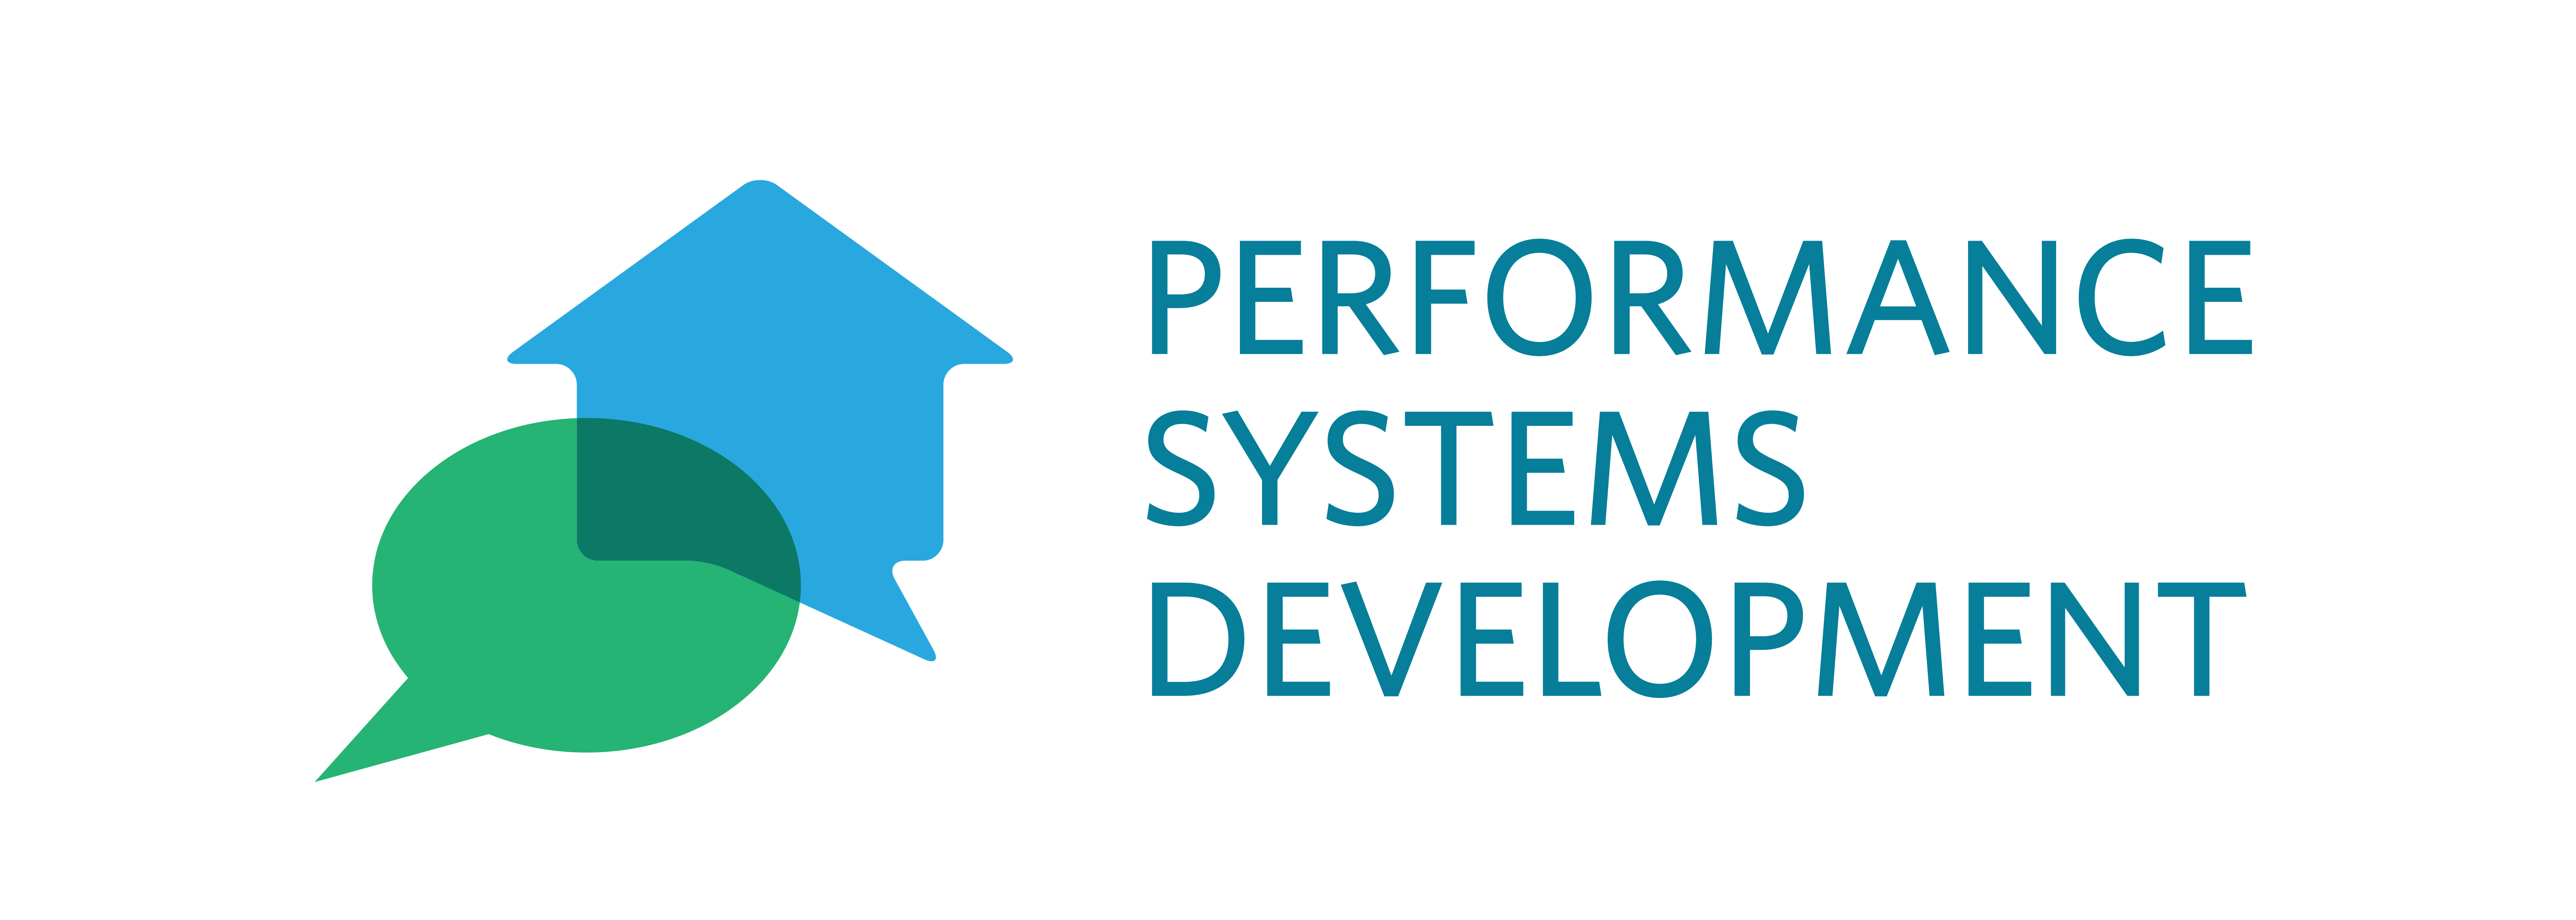 Performance System Development, Thursday, May 24, 2018, Press release picture